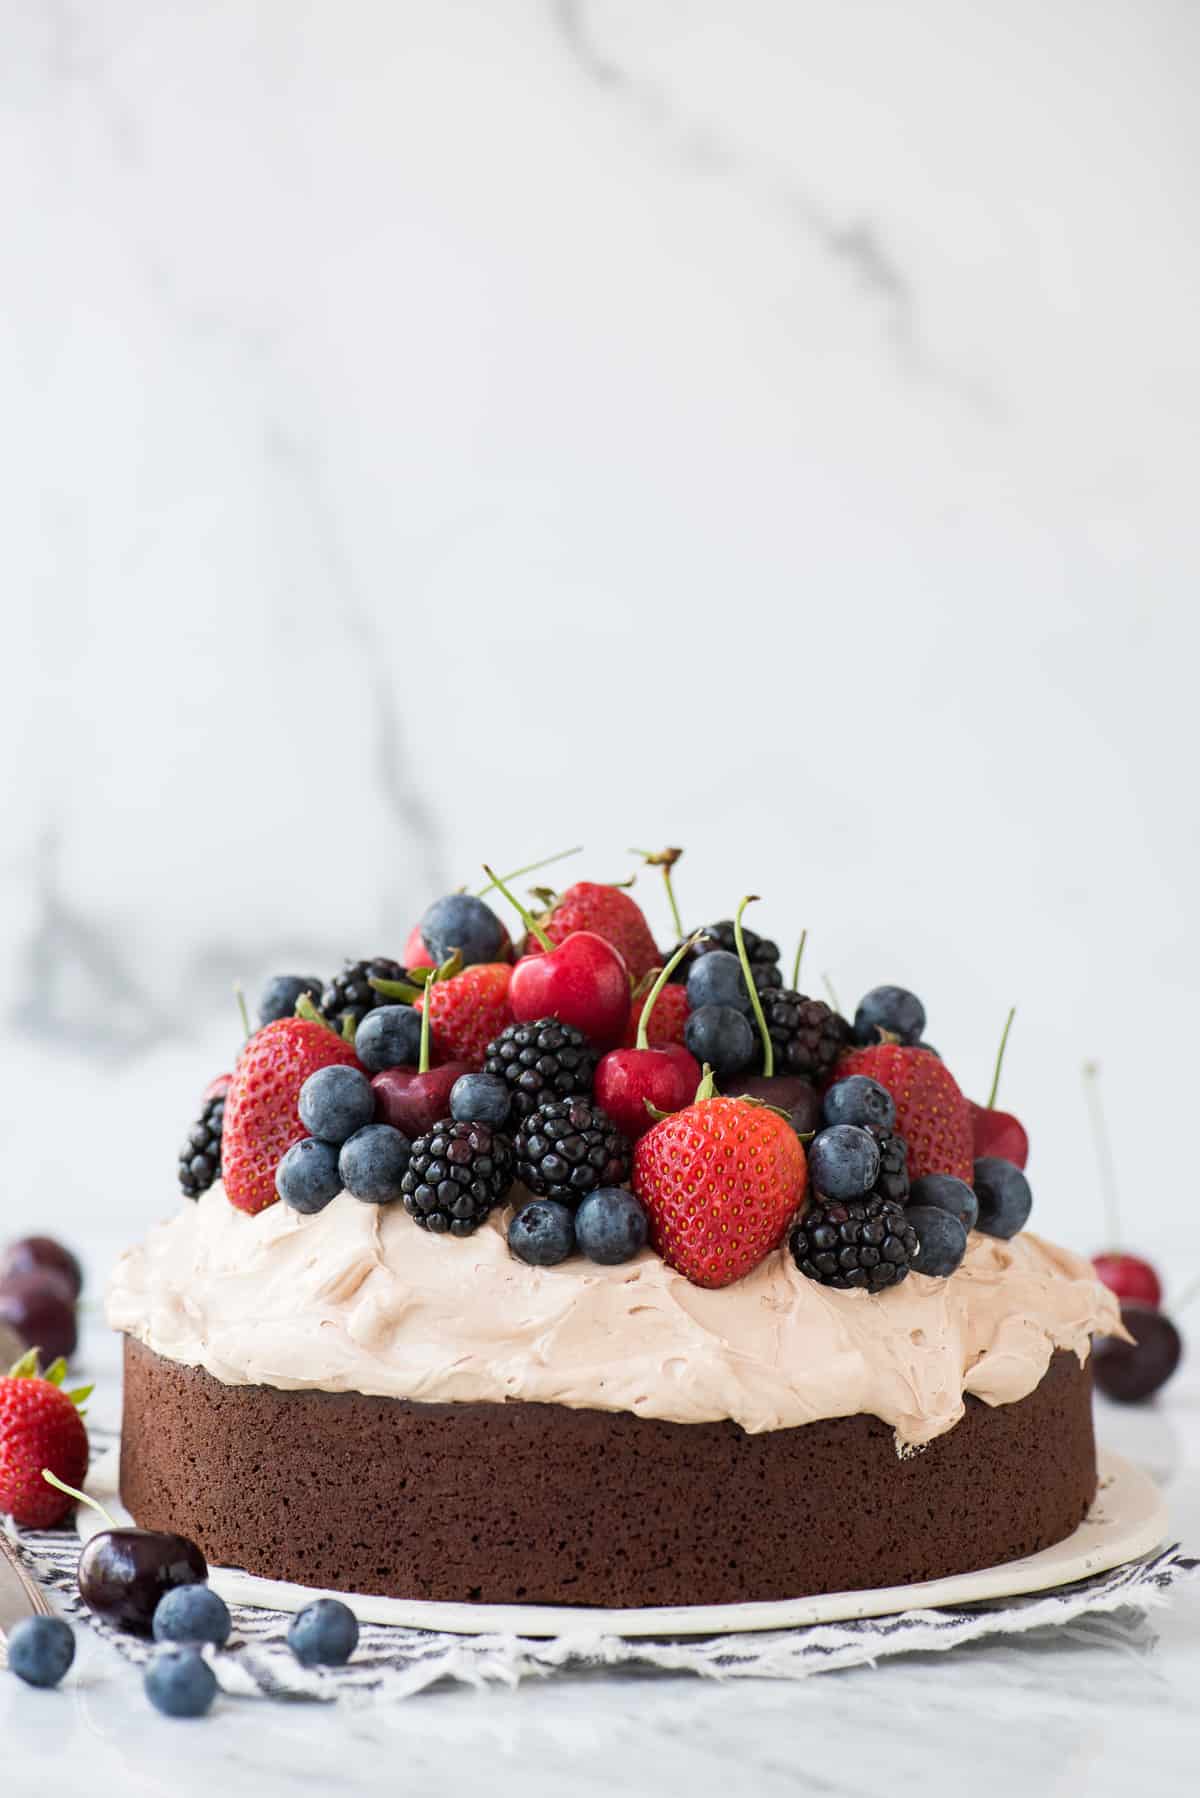 chocolate cake with whipped frosting topped with fresh cherries, strawberries, and blackberries on white plate on white background